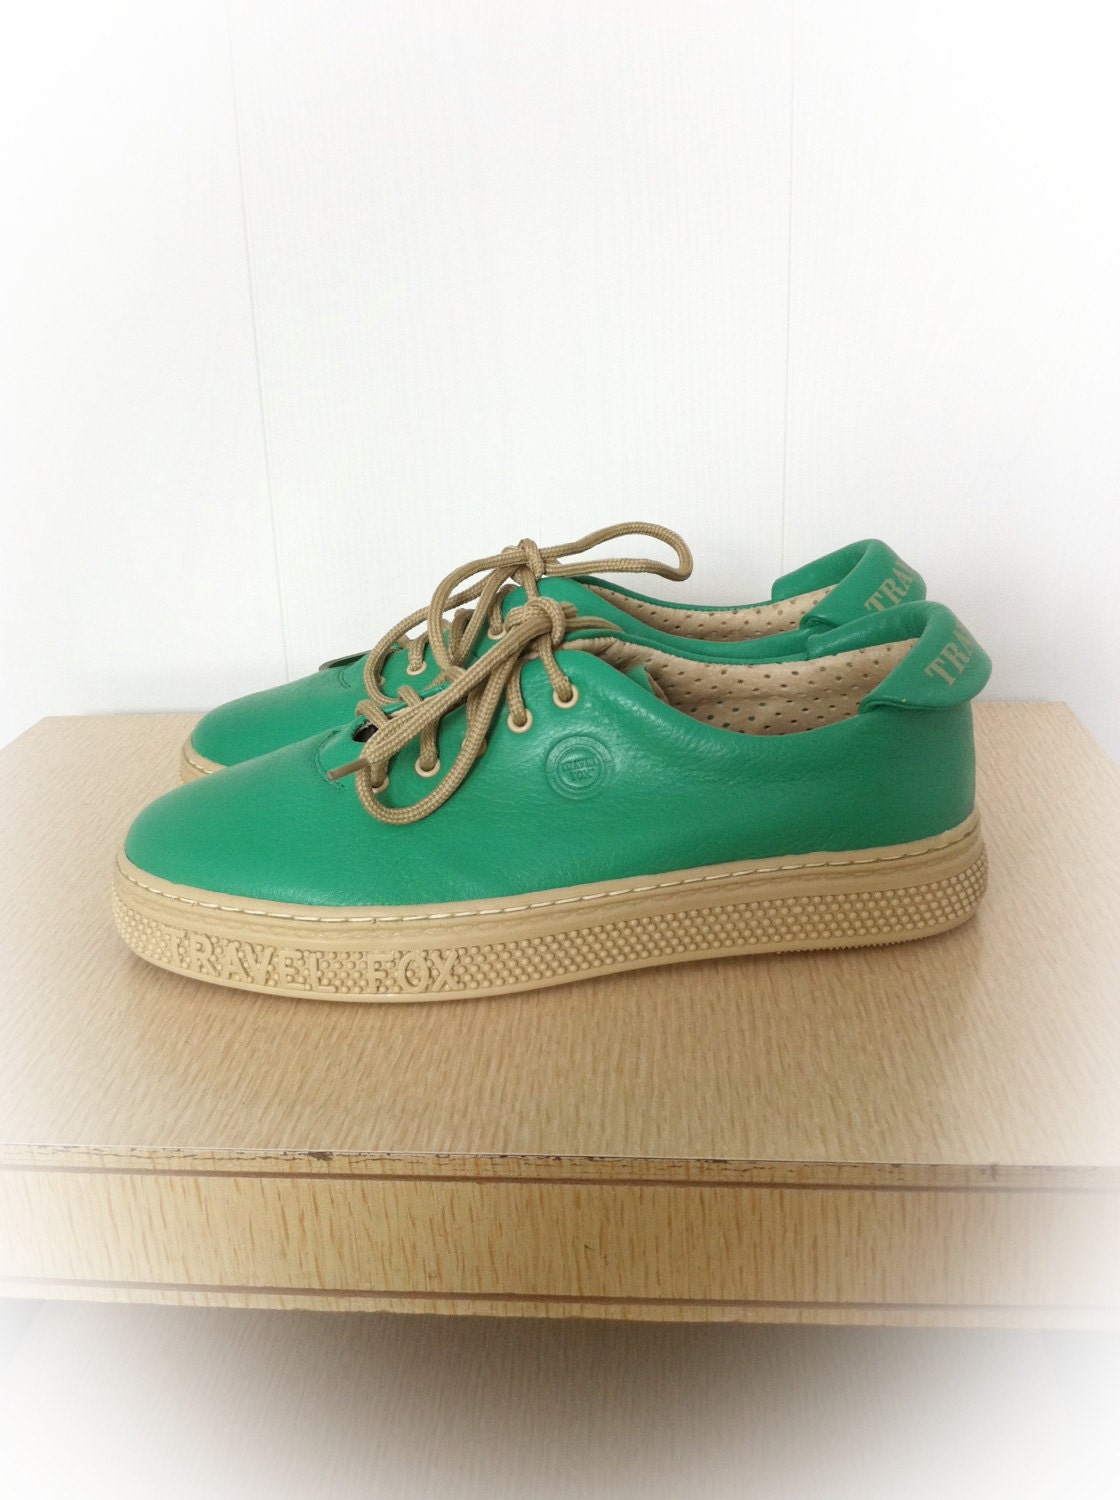 Vintage 1980s Travel Fox Shoes Green Sneakers Deadstock Euro